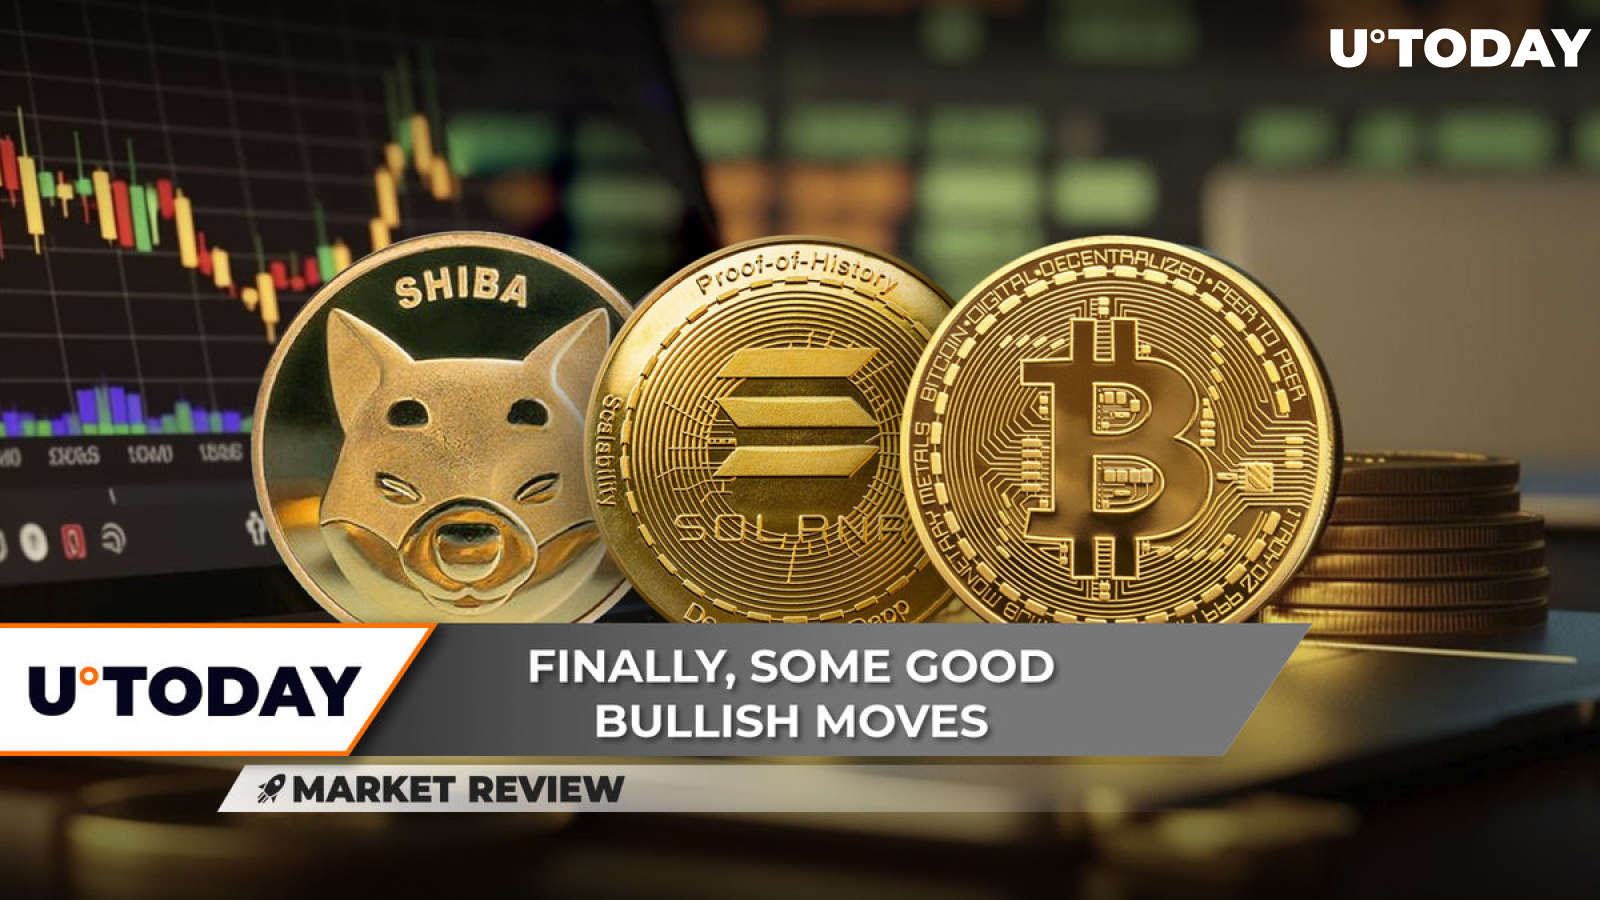 Finally Shiba Inu (SHIB) on Verge of Breakthrough, Solana (SOL) to Get Squeezed, Is Bitcoin (BTC) Getting out of Downtrend?